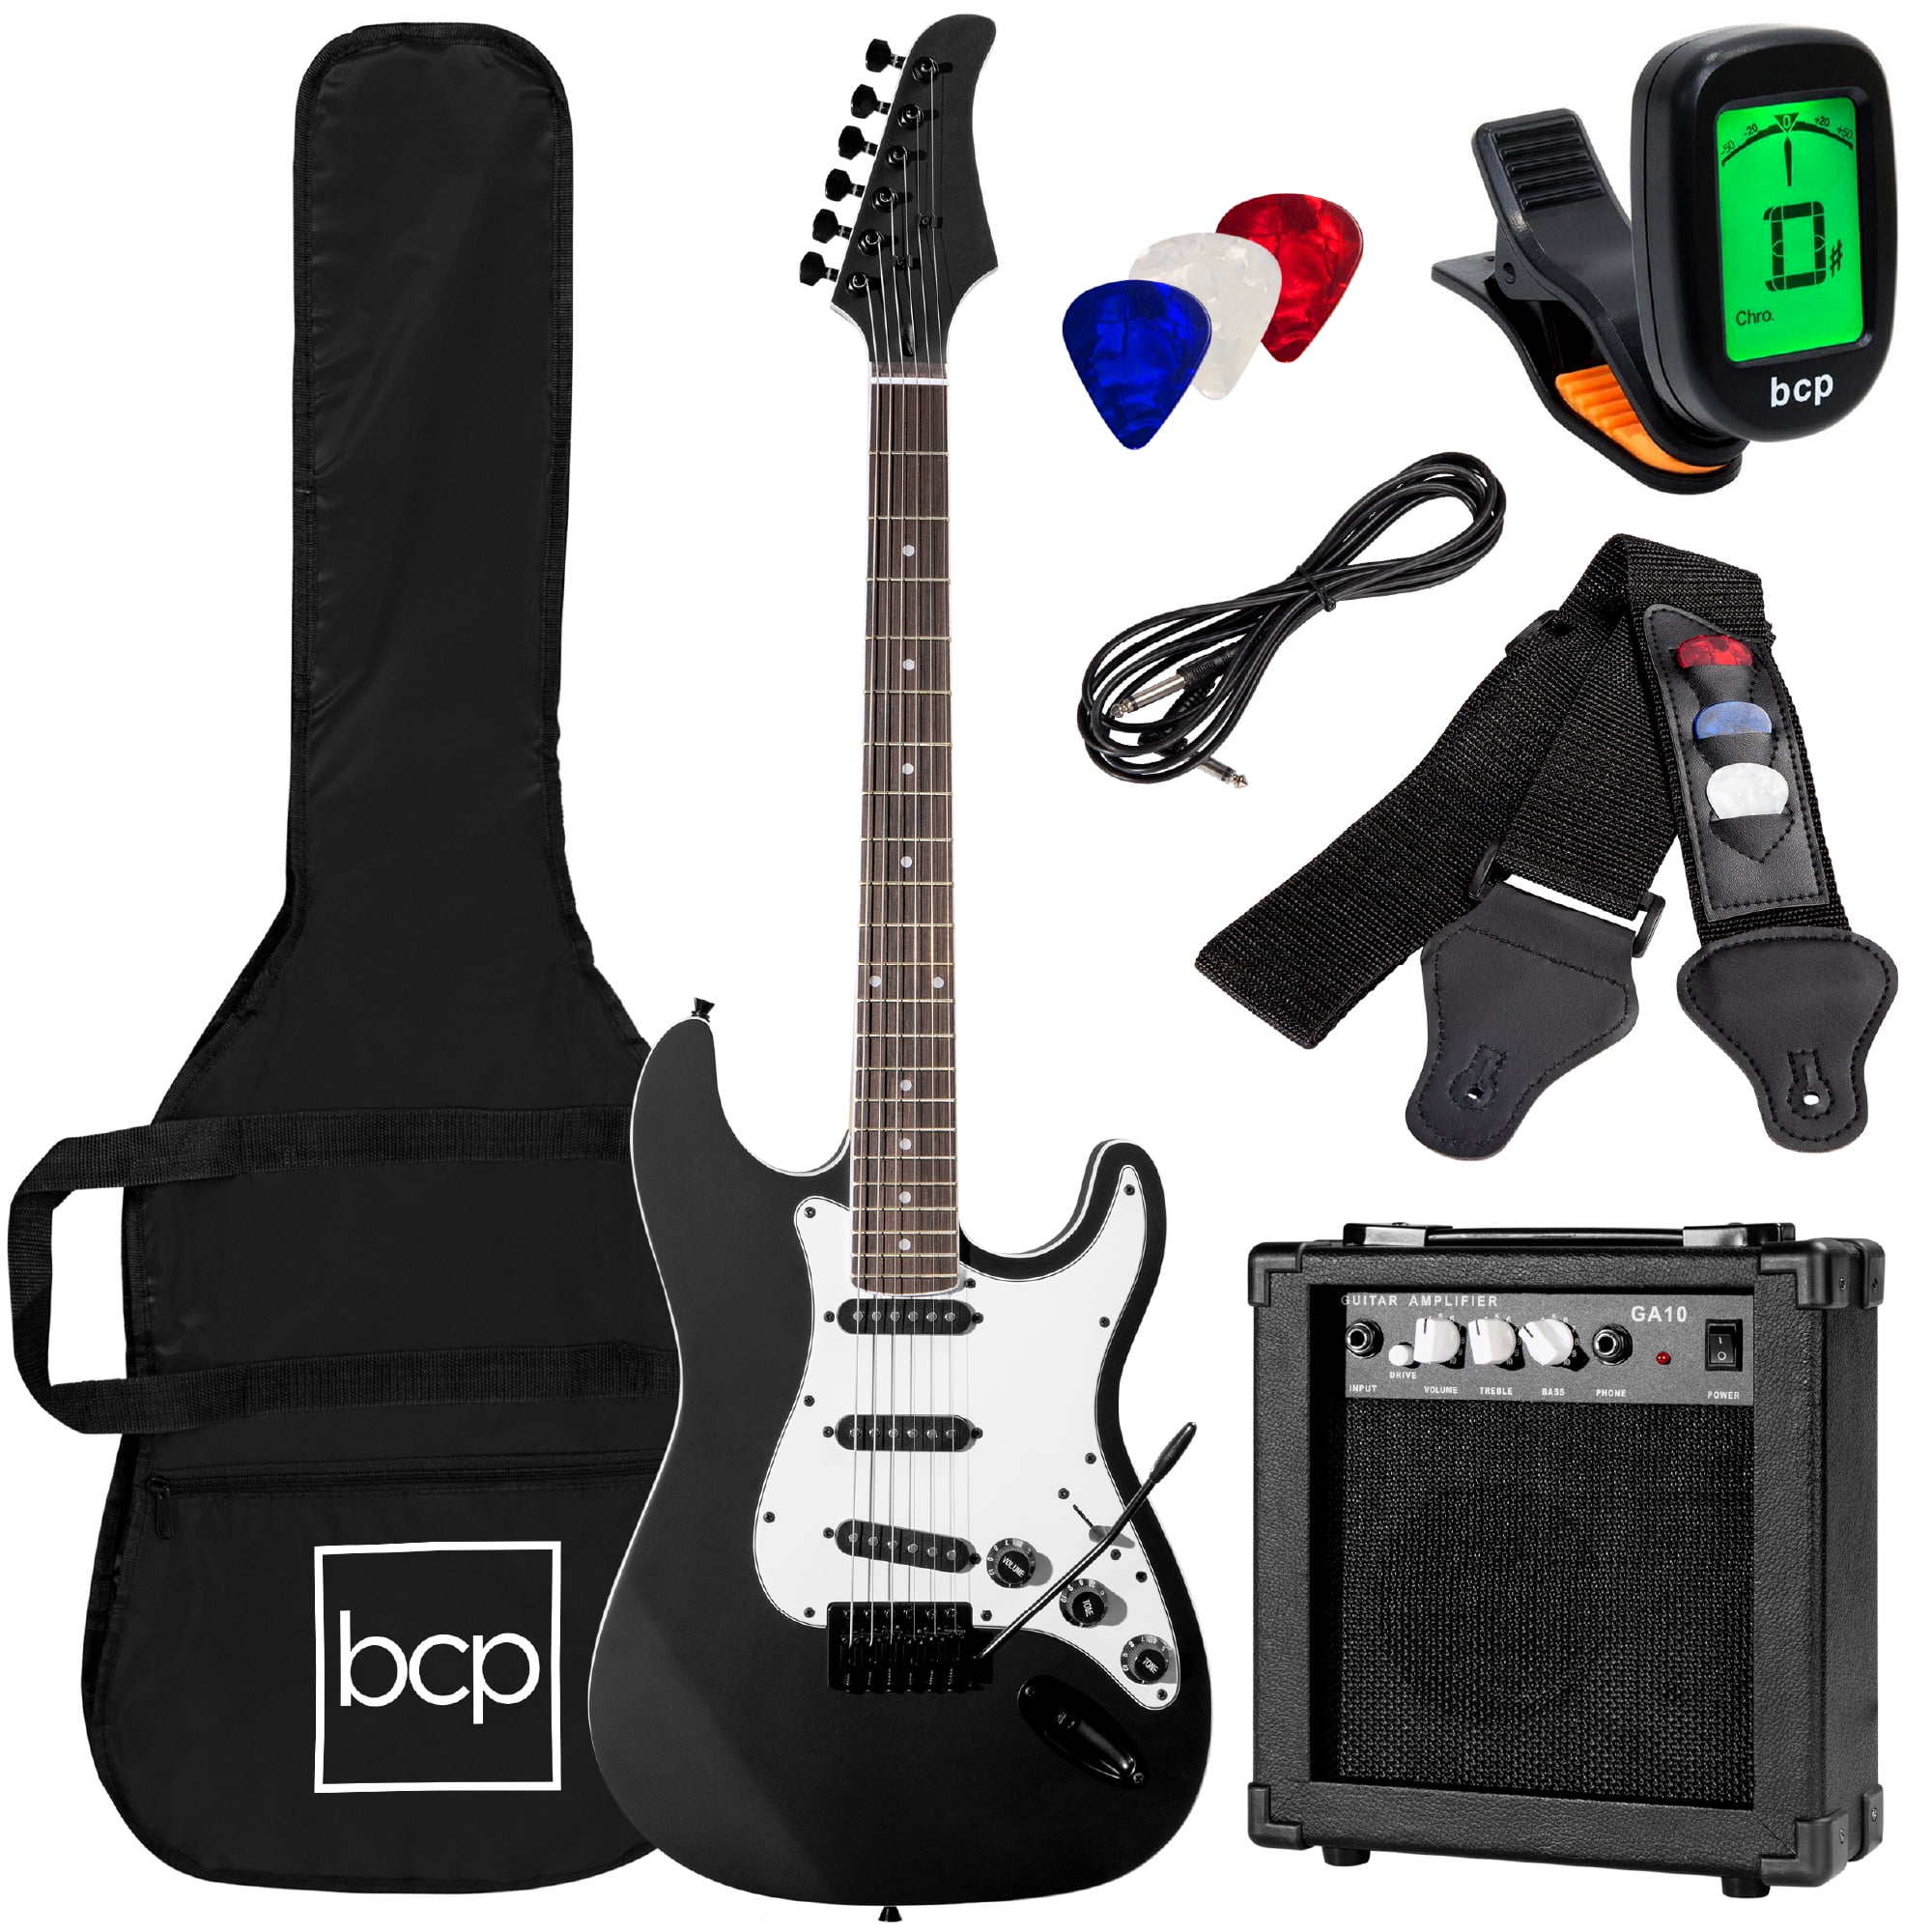 best-choice-products-39in-full-size-beginner-electric-guitar-kit-with-case-strap-amp-whammy-bar-jet-black-walmart-com